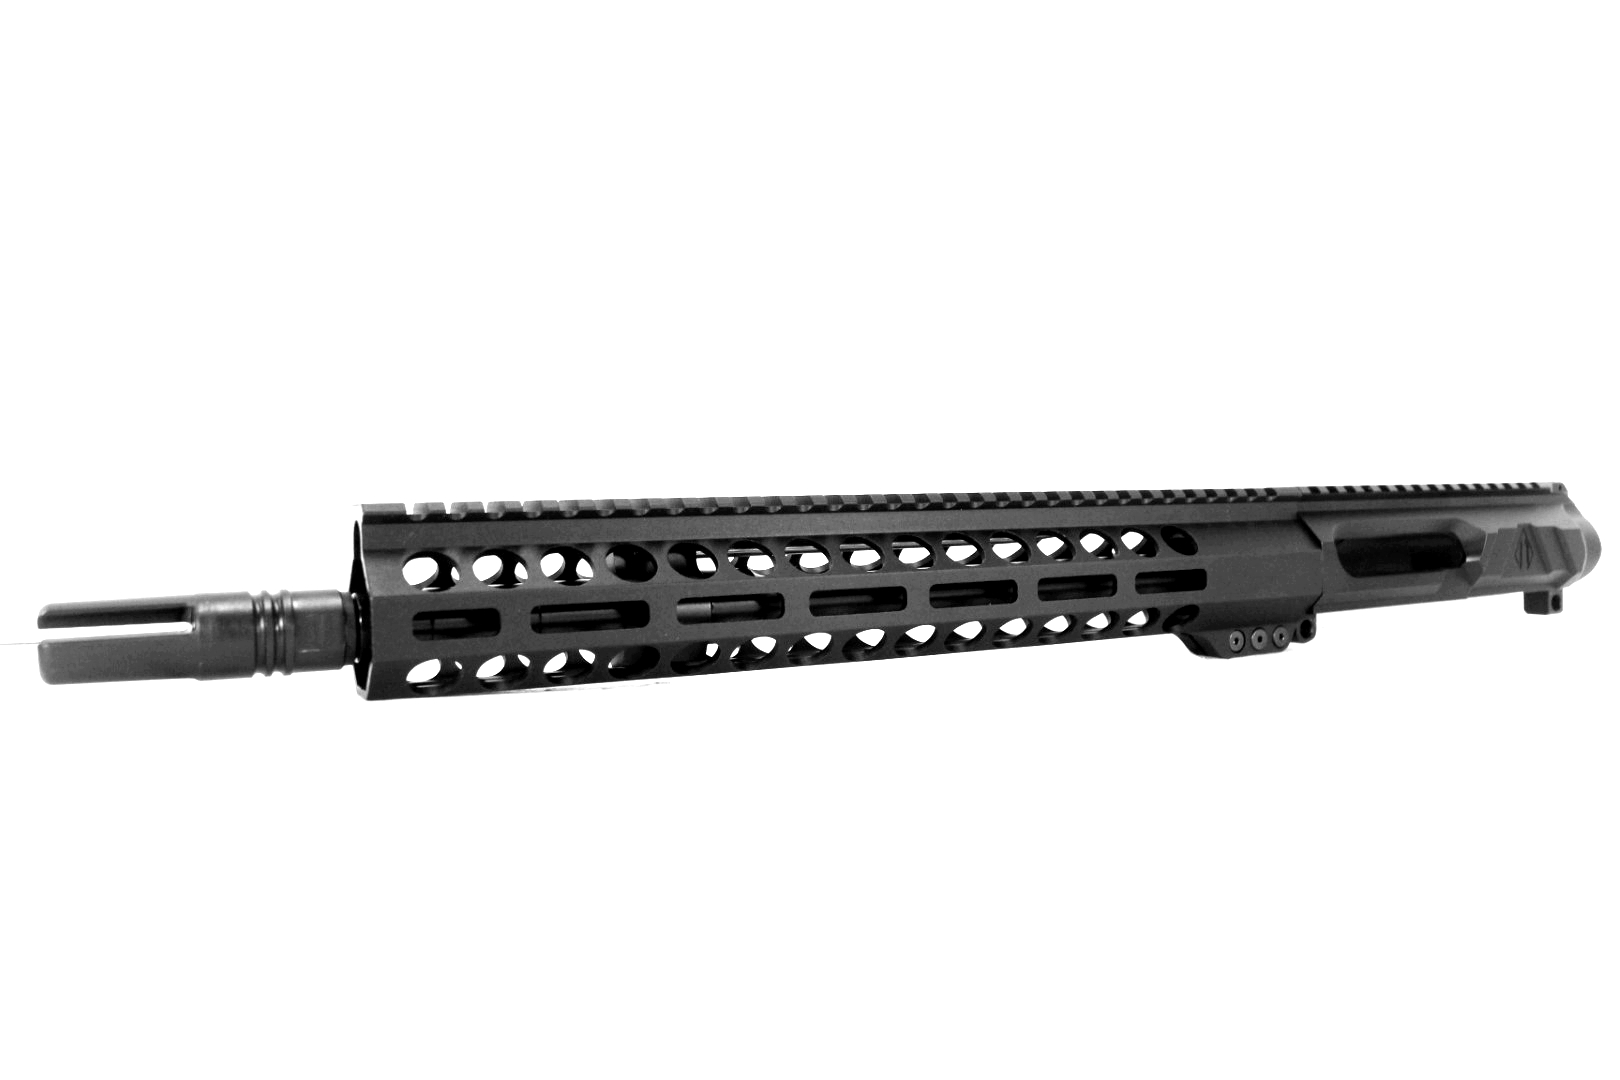 13.7 inch AR-15 LEFT HANDED AR-15 NR Side Charging 5.56 NATO Upper w/Can - Pinned & Welded